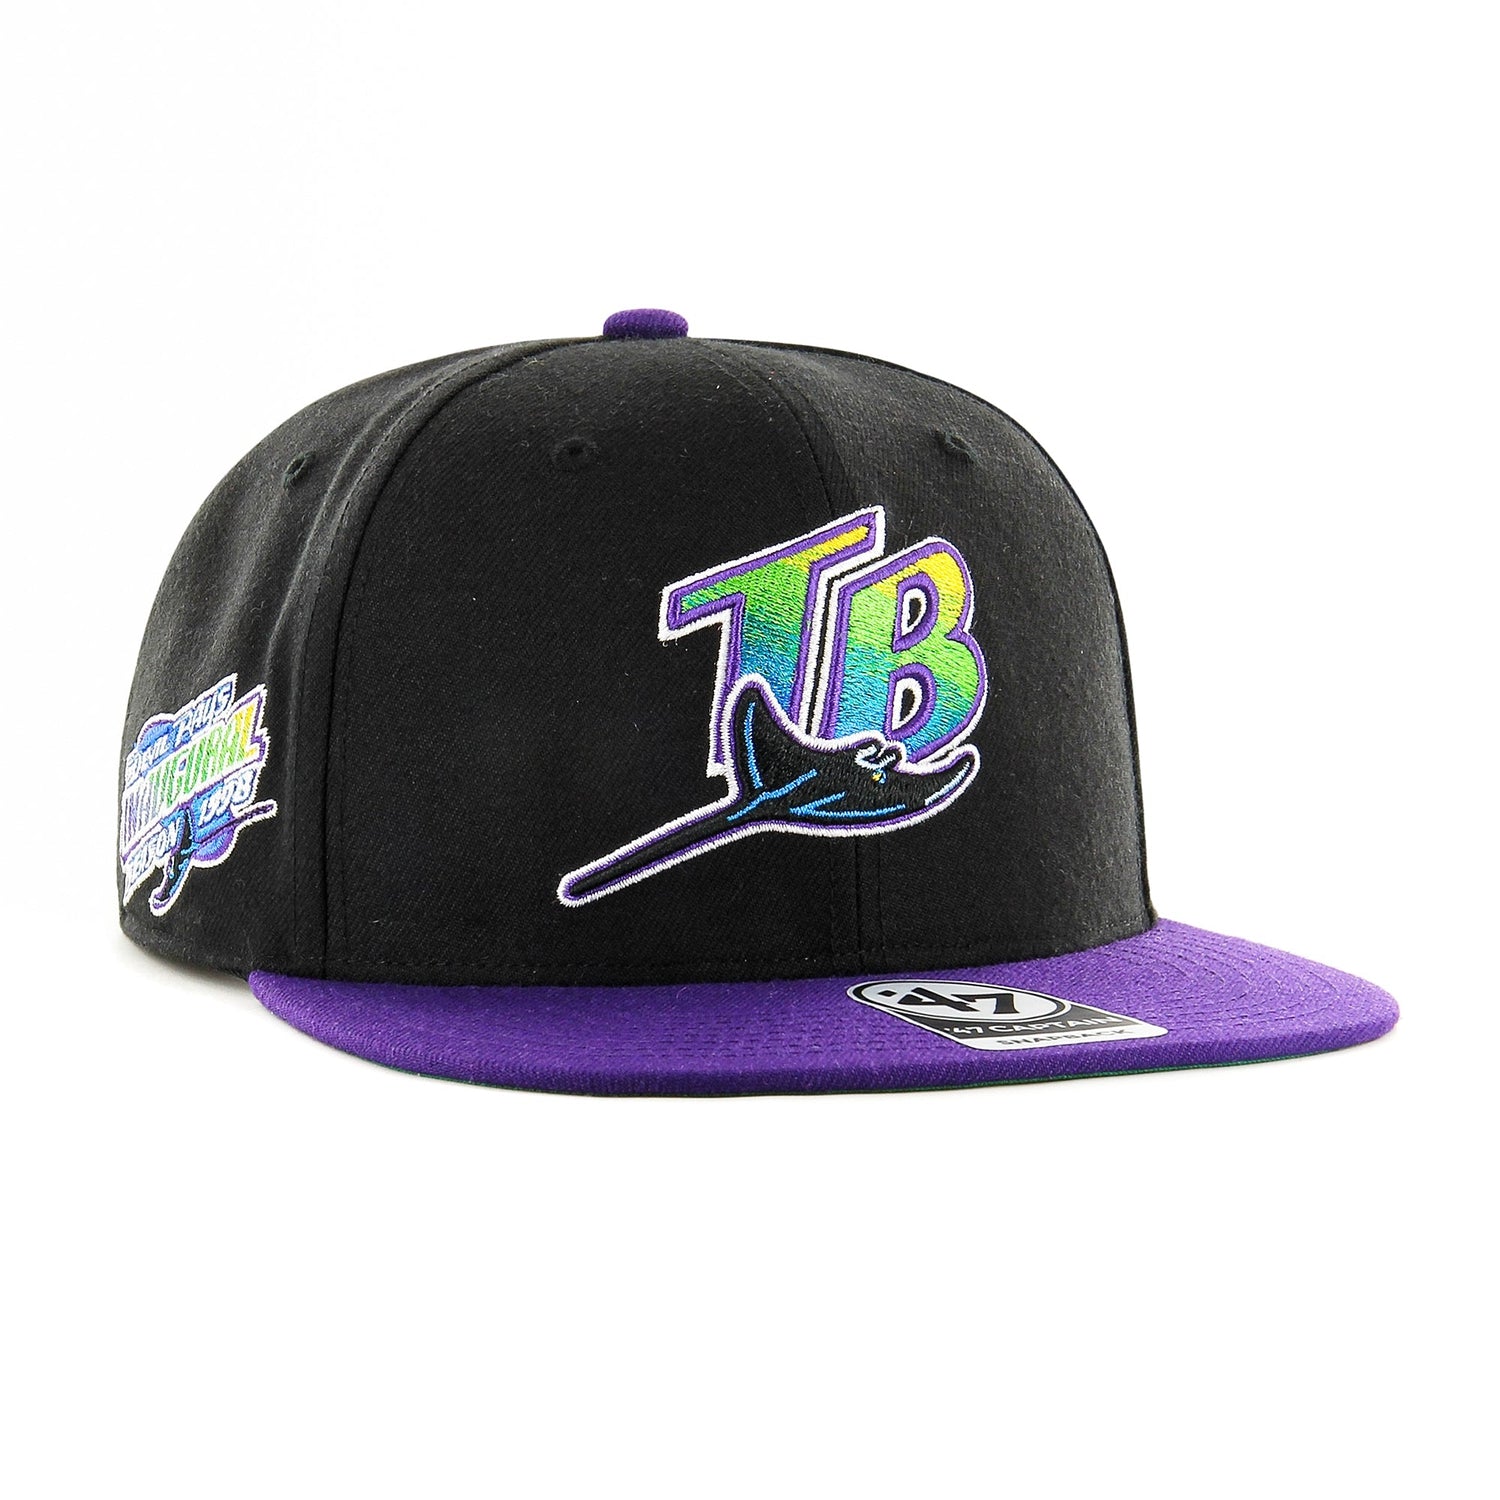 New Era 59FIFTY Black Dome Tampa Bay Rays Inaugural Patch Word Hat - Black Black / 7 1/4